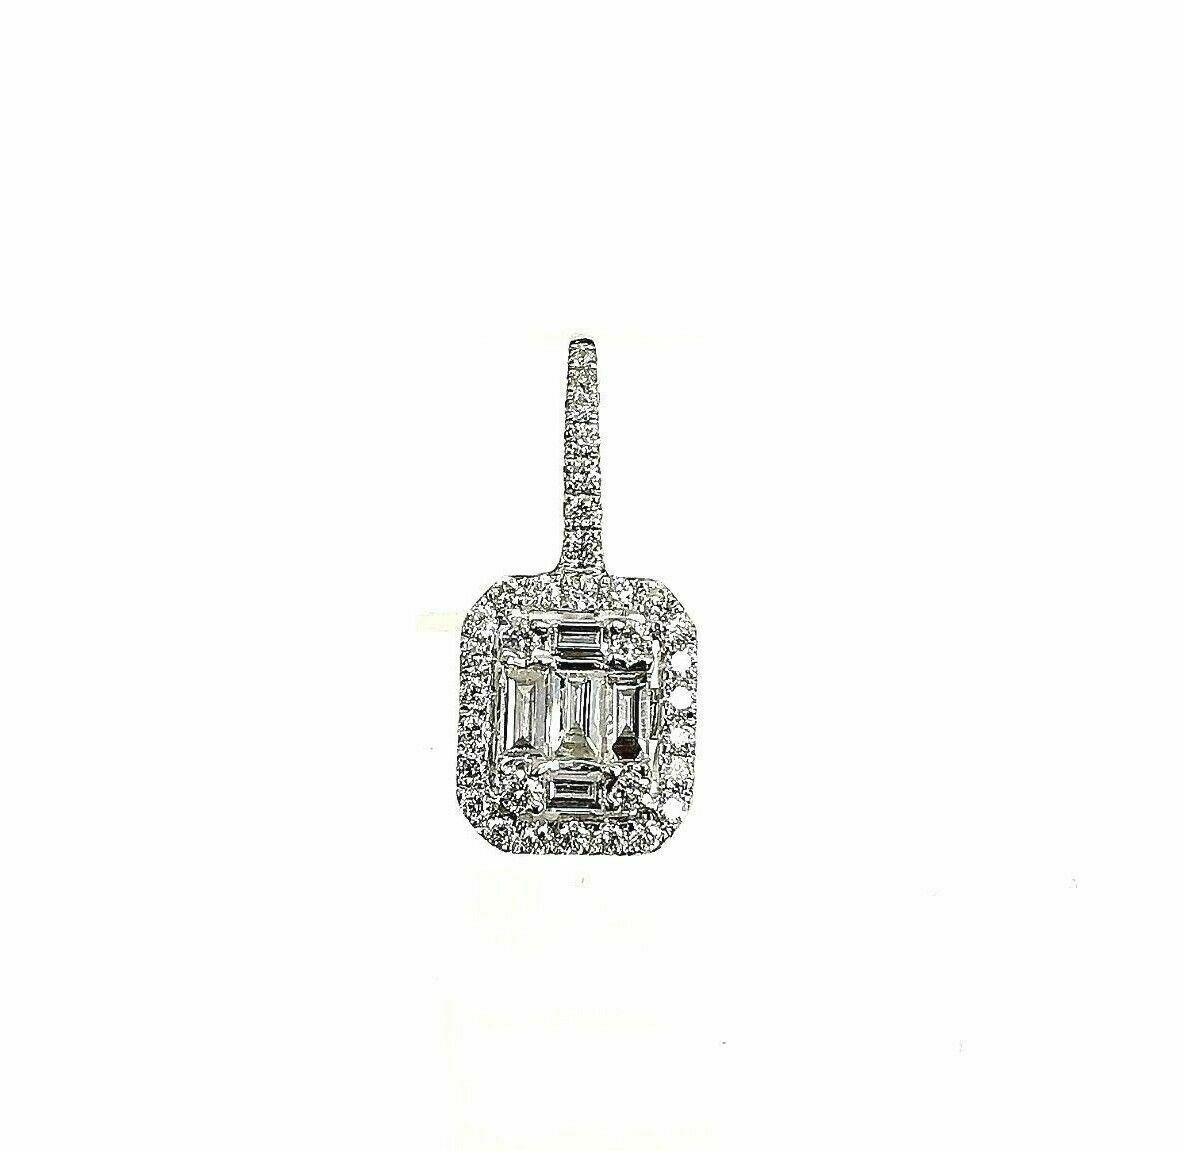 0.90 Carats Invisible Baguette and Round Diamond Halo Earrings 18K White Gold